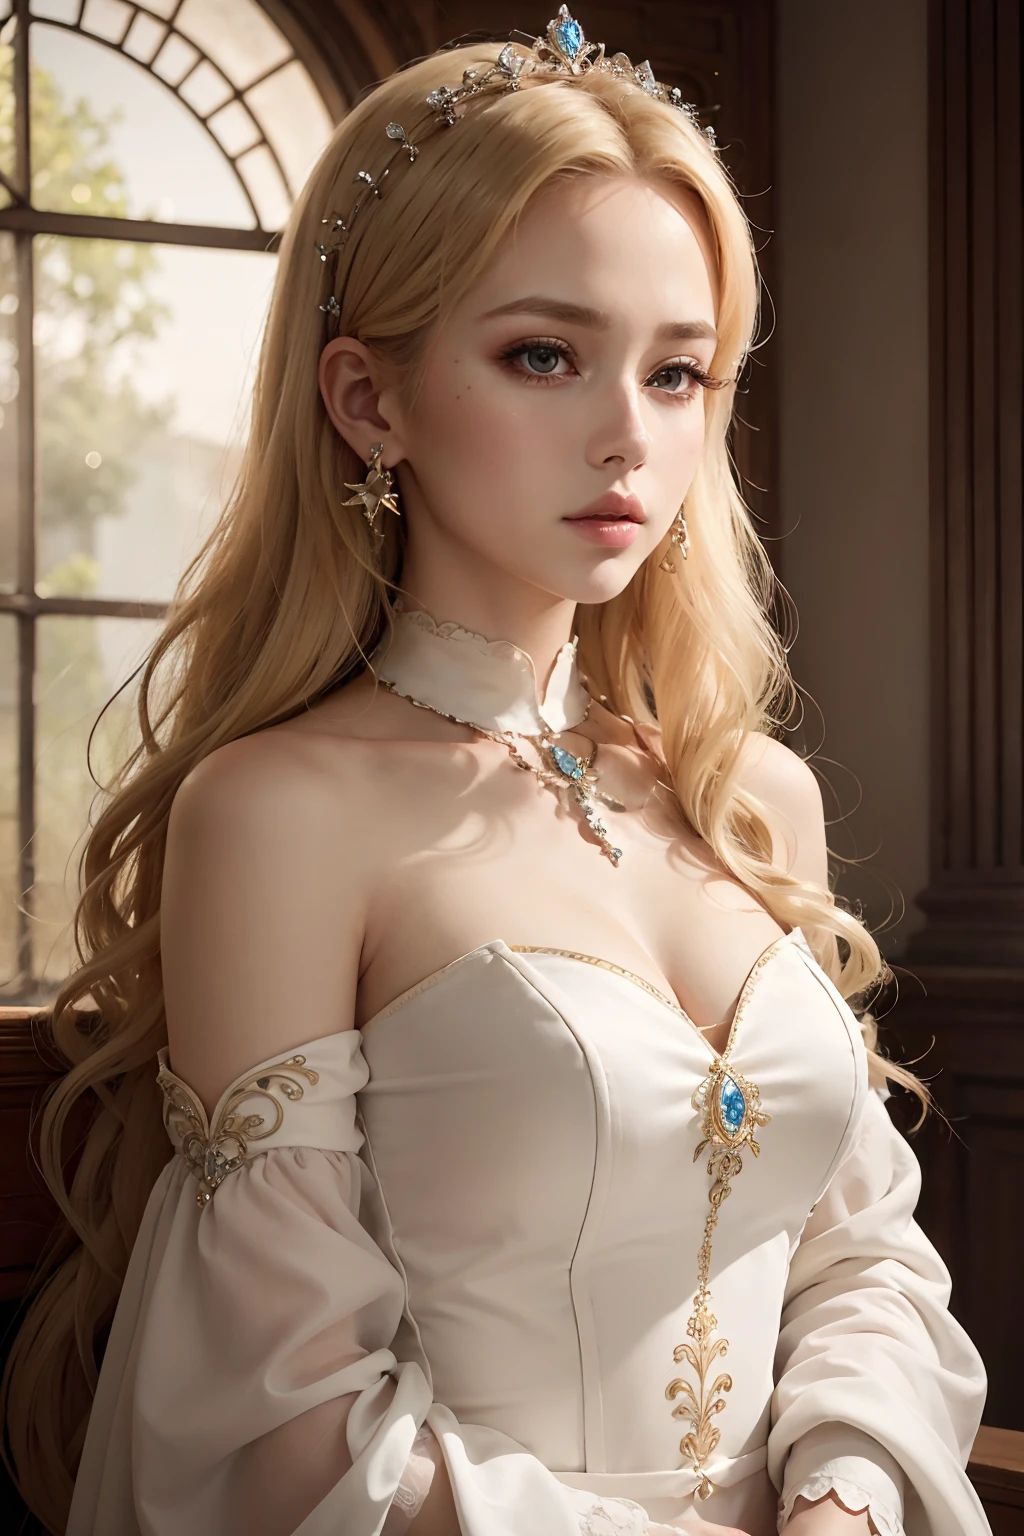 Very beautiful princess bright eyes blonde hair jowlery super detailed hyper realistic masterpiece different lighting senarios full neck covered with outfit